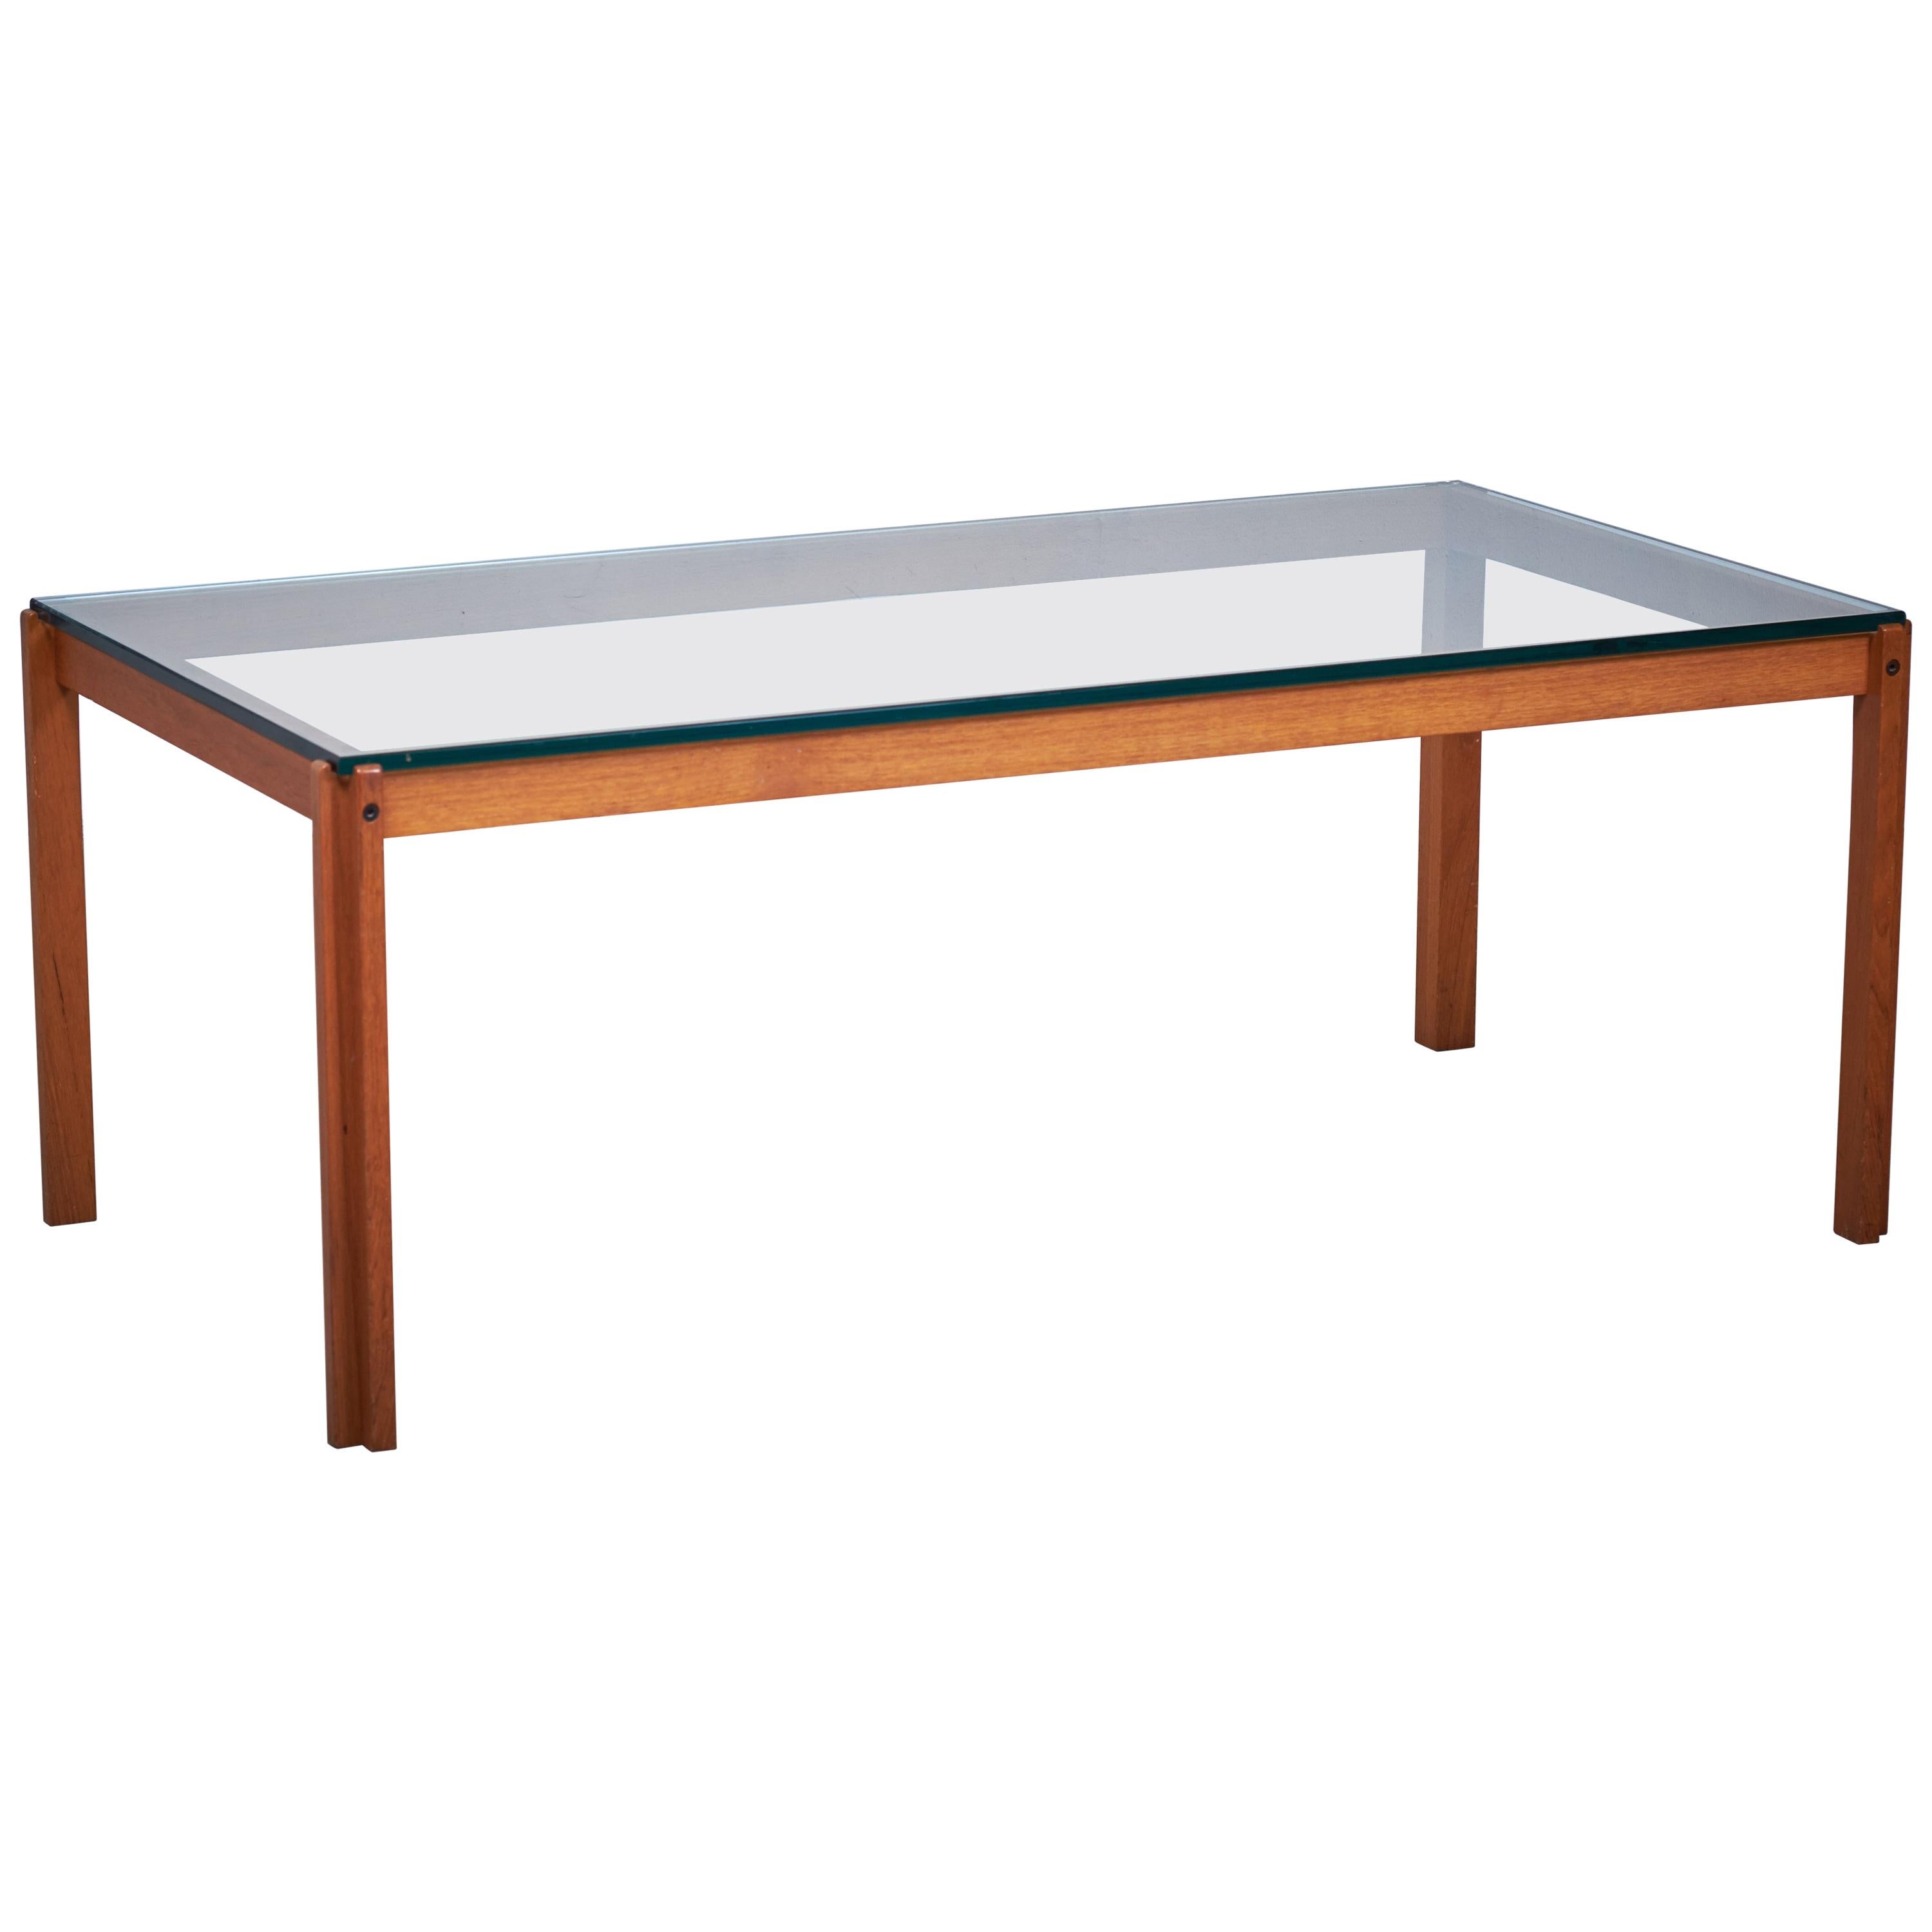 Danish Teak and Glass Coffee Table, 1960s For Sale